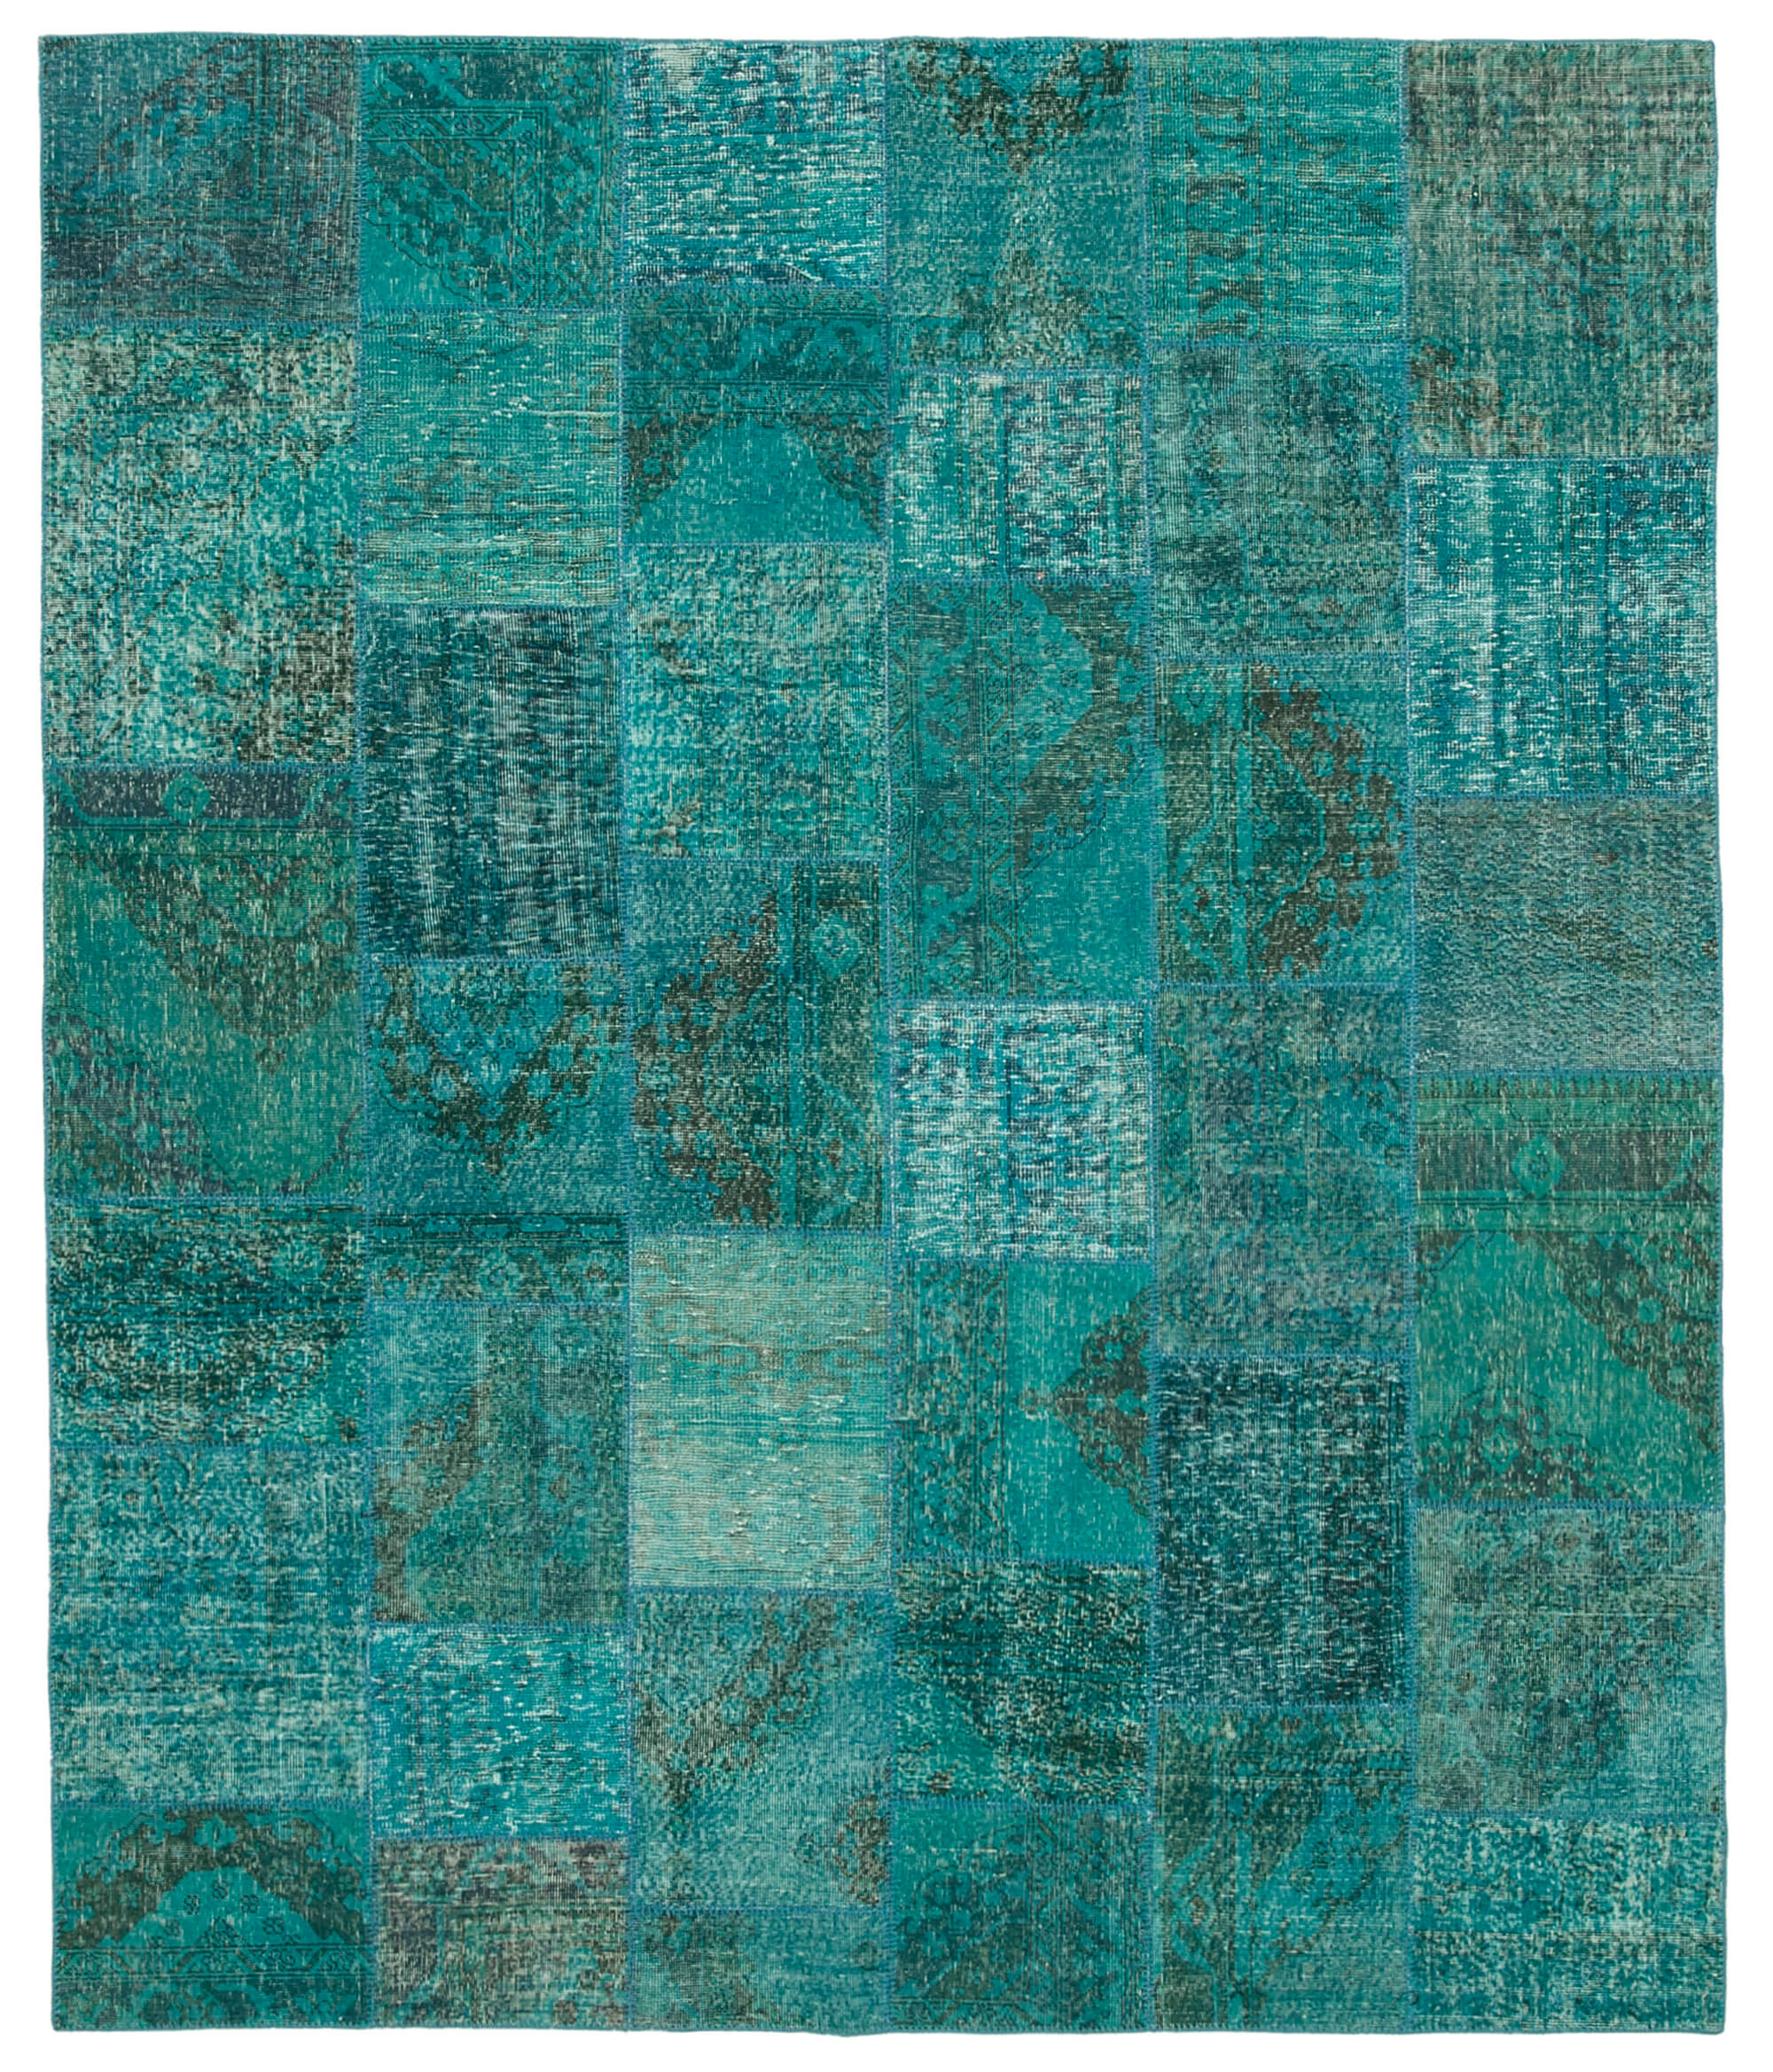 8x10 Turquoise Oriental Wool Patchwork Area Rug -13047